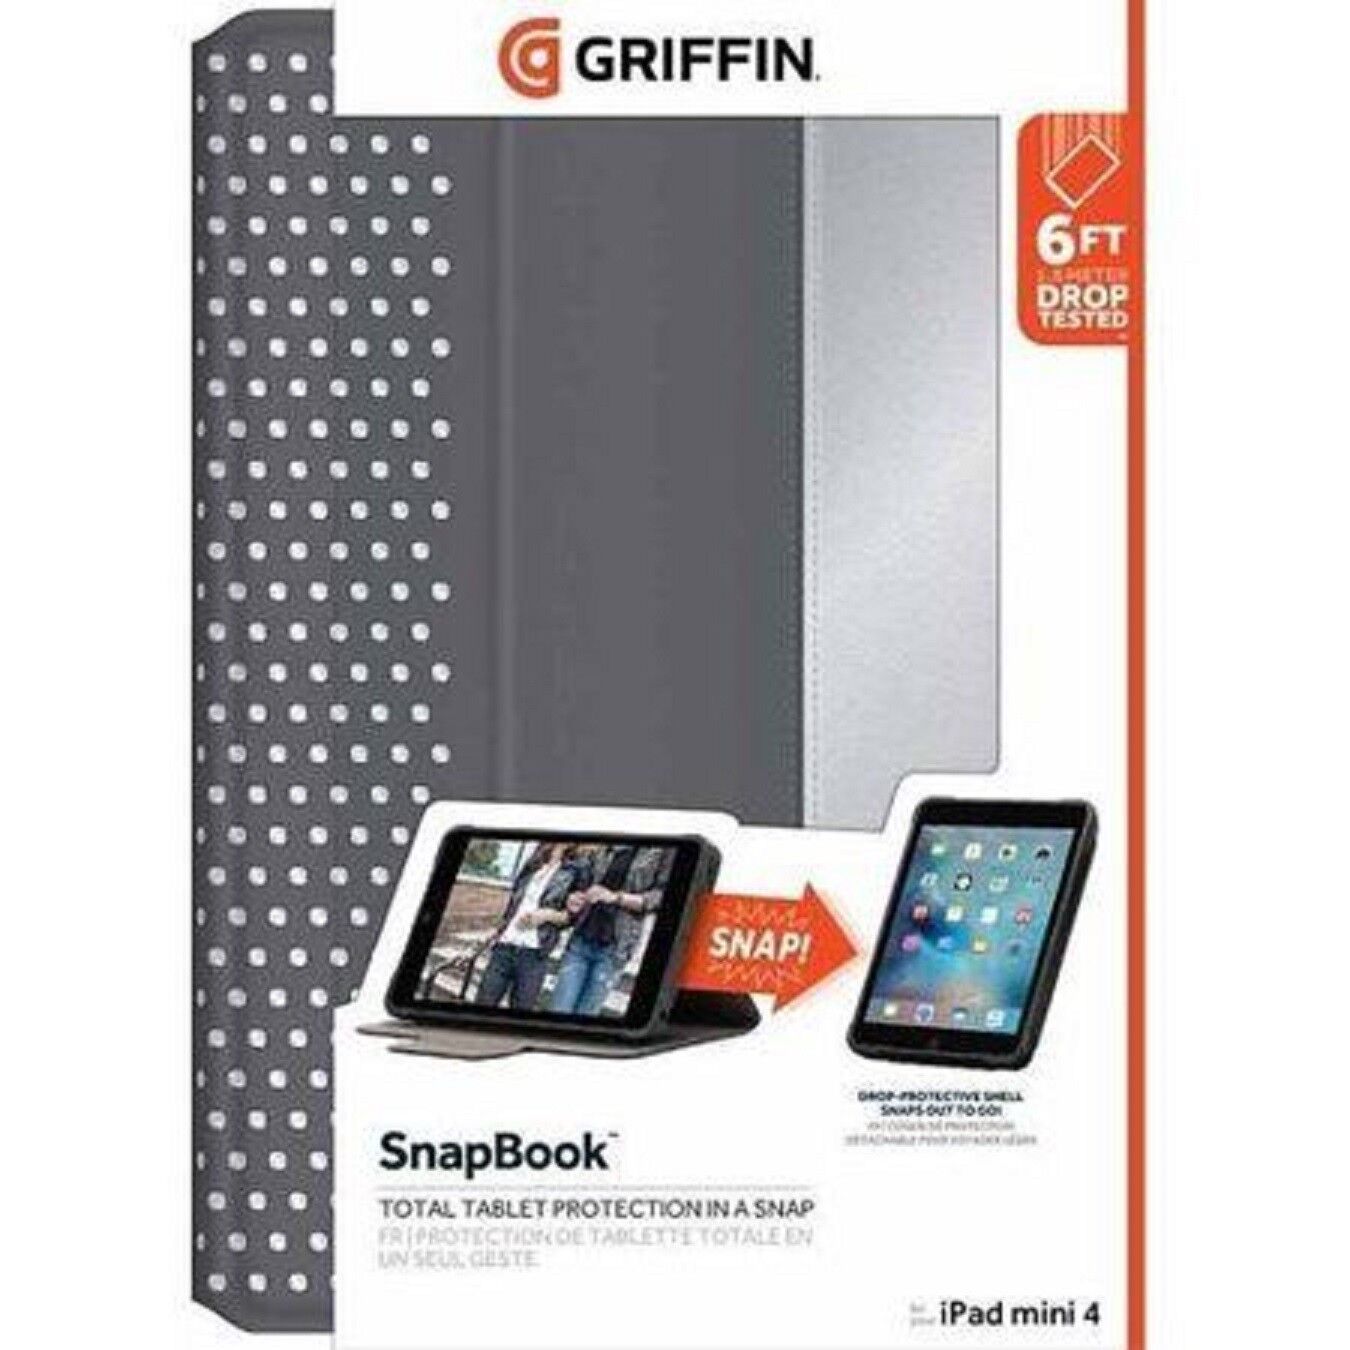 Griffin Apple iPad Mini 4 Protective Folio and Shell SnapBook Tablet Case Gray - $24.75